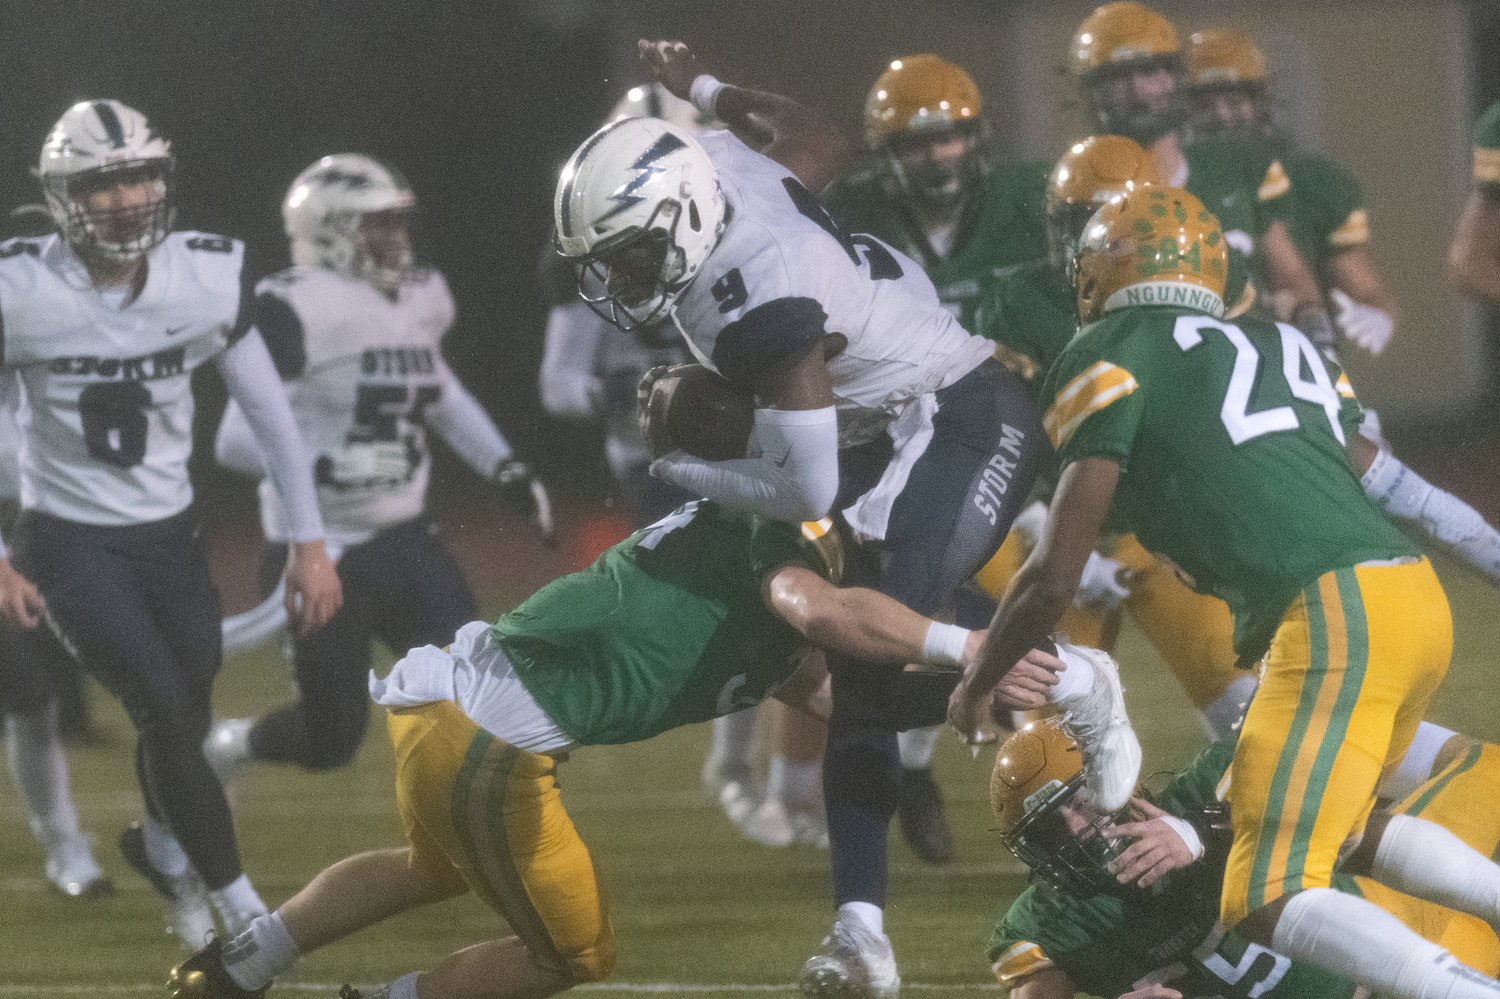 Squalicum's tailback attempts to hurdle past Tumwater defenders in the 2A state semifinals Nov. 27.